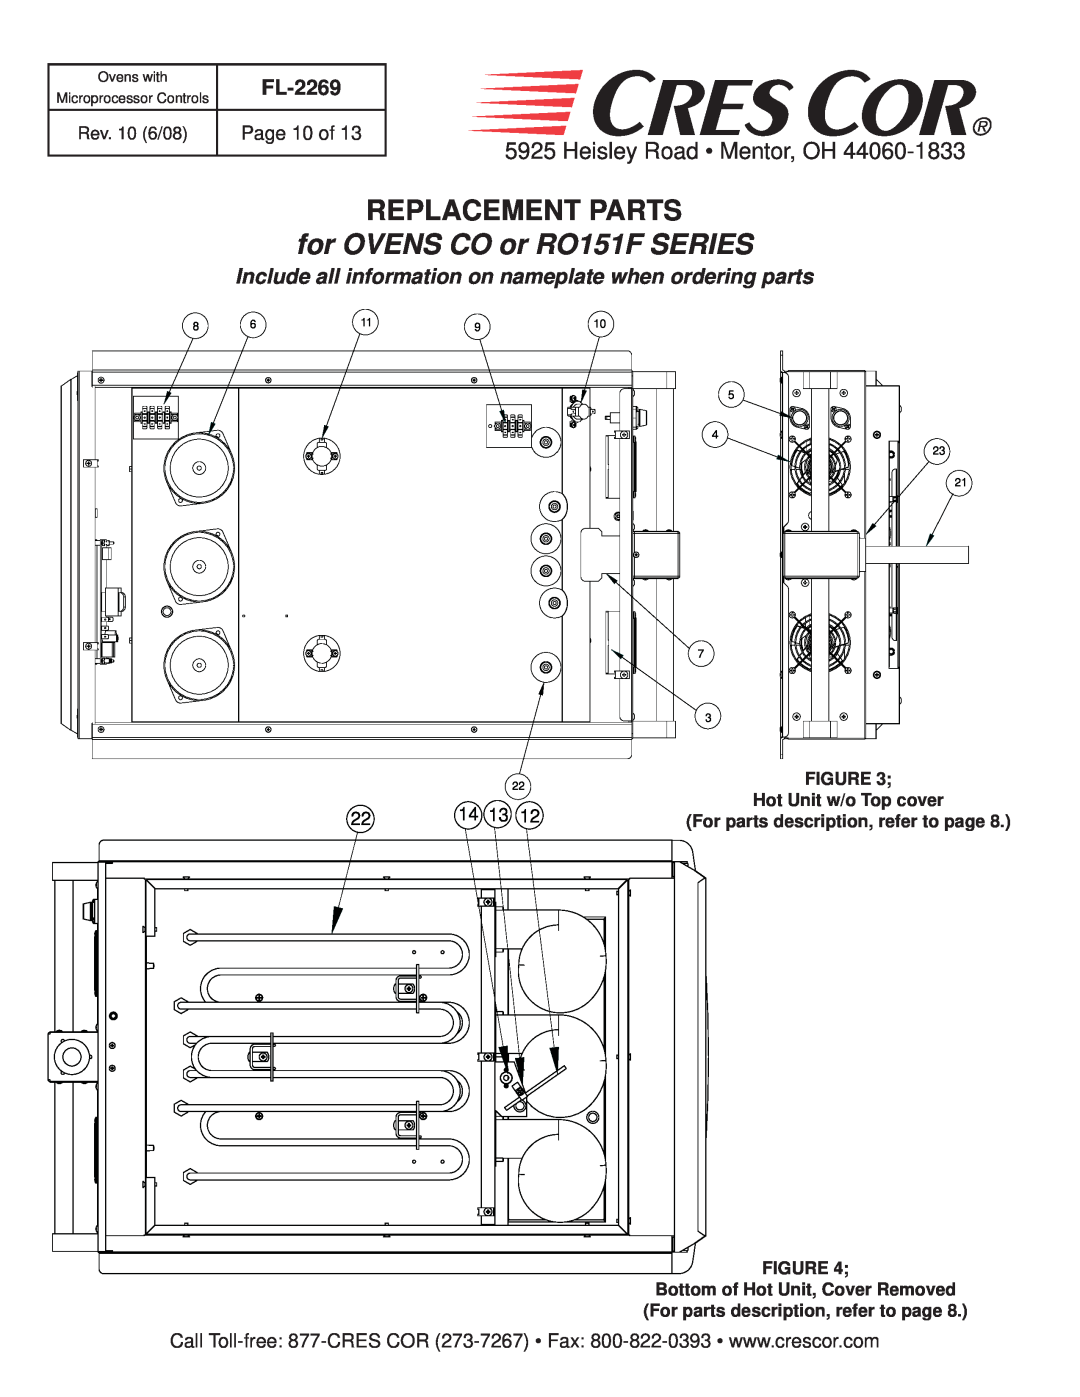 Cres Cor CO151HUA6B-Q1 for OVENS CO or RO151F SERIES, Replacement Parts, Heisley Road Mentor, OH, FL-2269, Page 10 of 